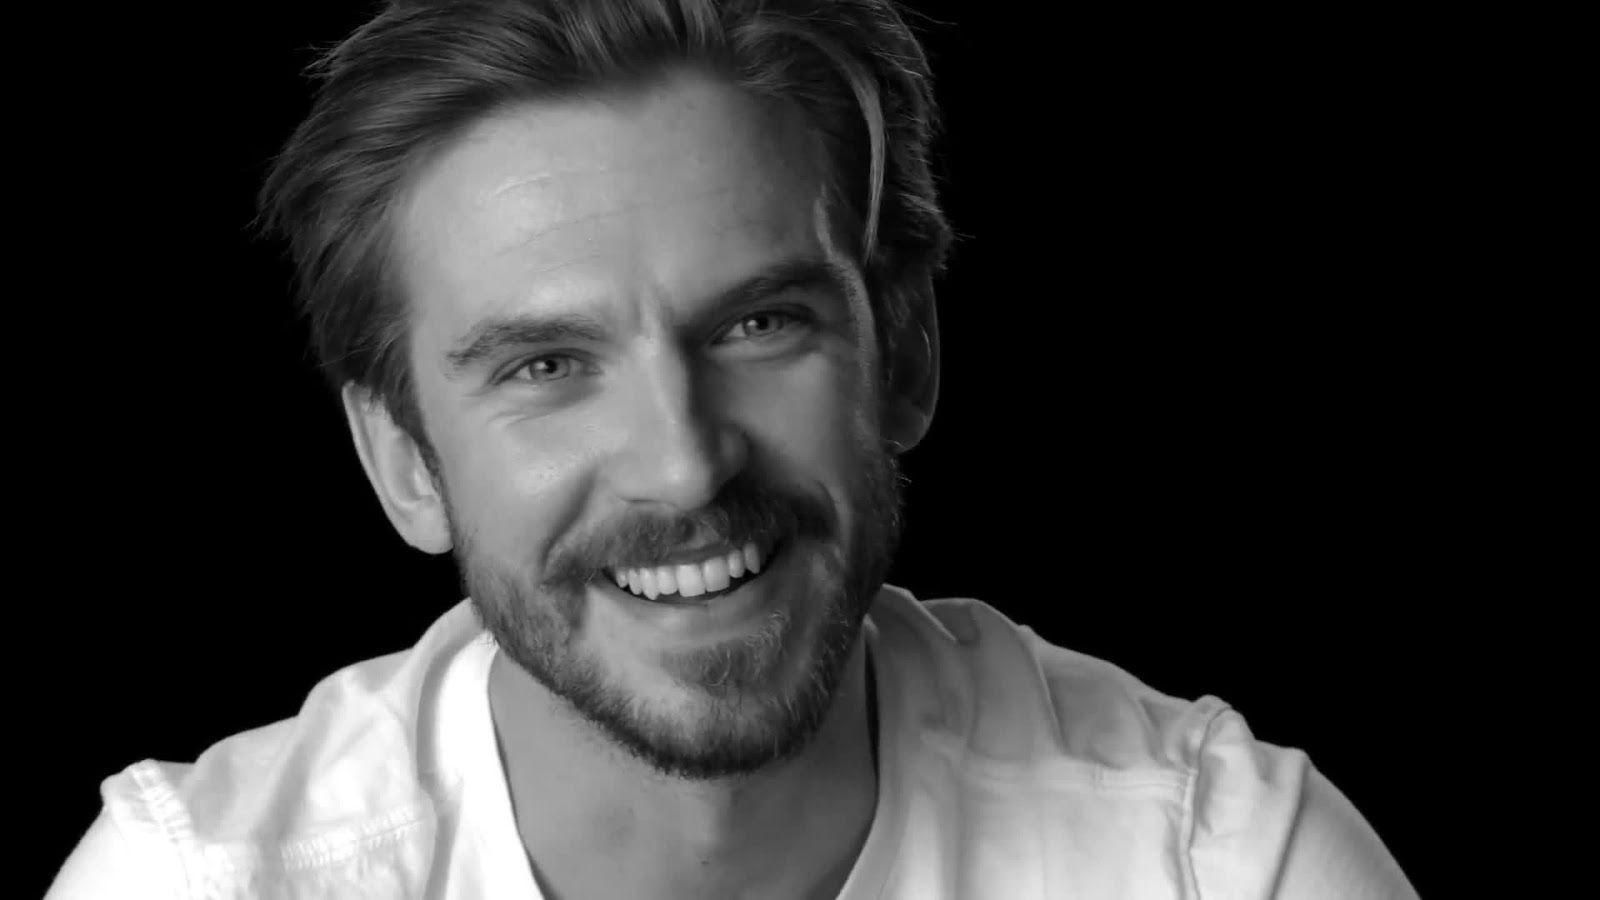 Dan Stevens All Upcoming Movies List 2017 With Release Dates